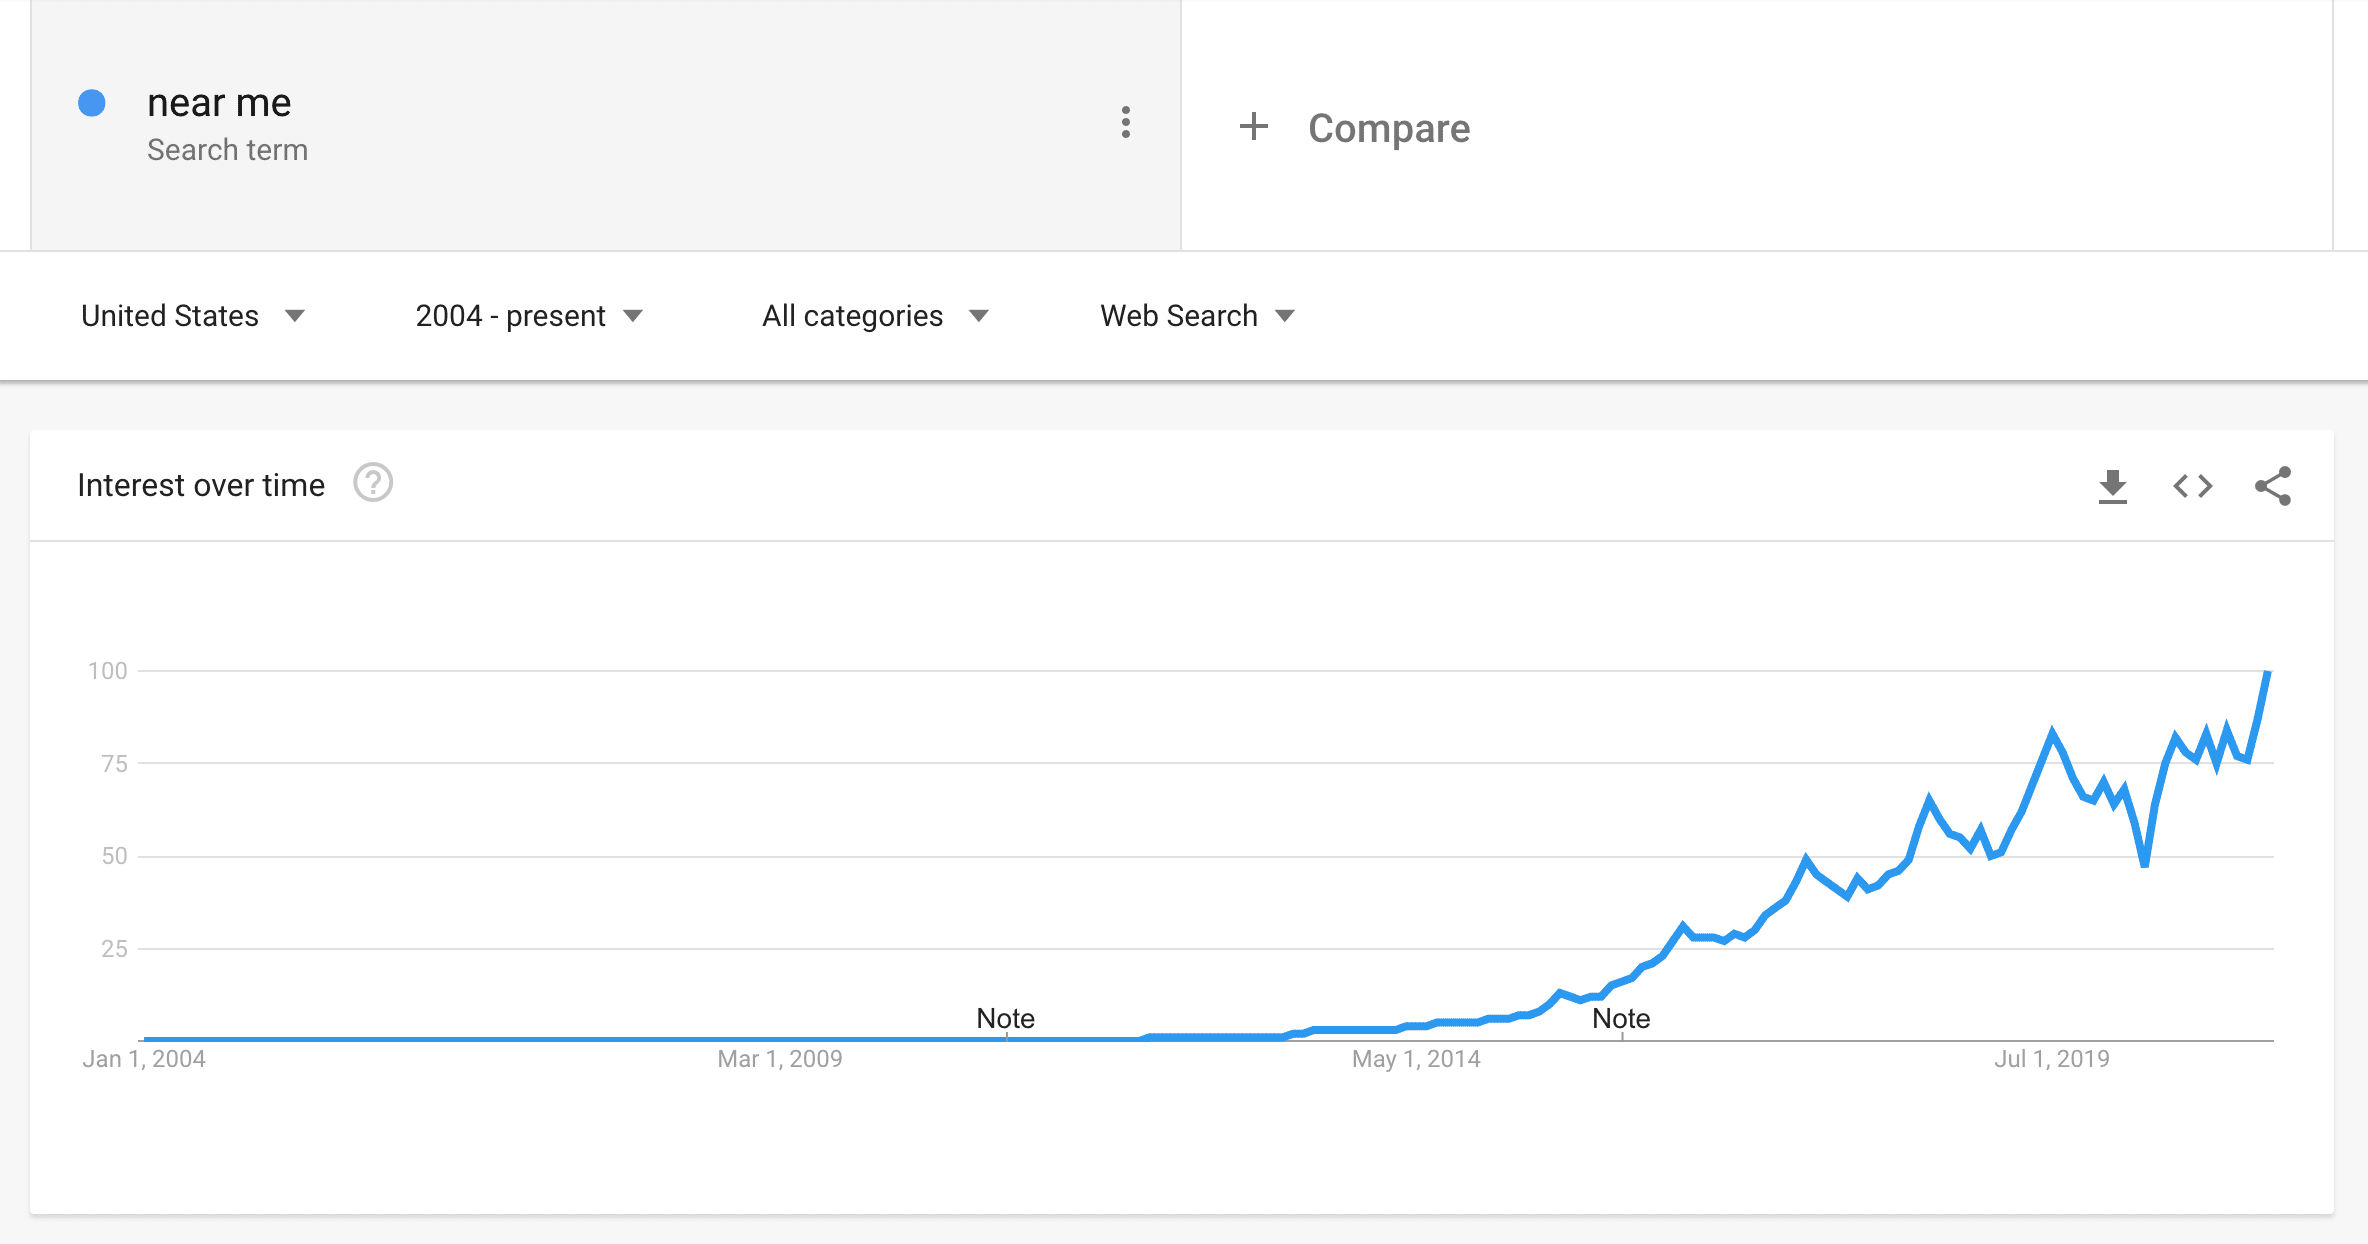 google trends near me searches